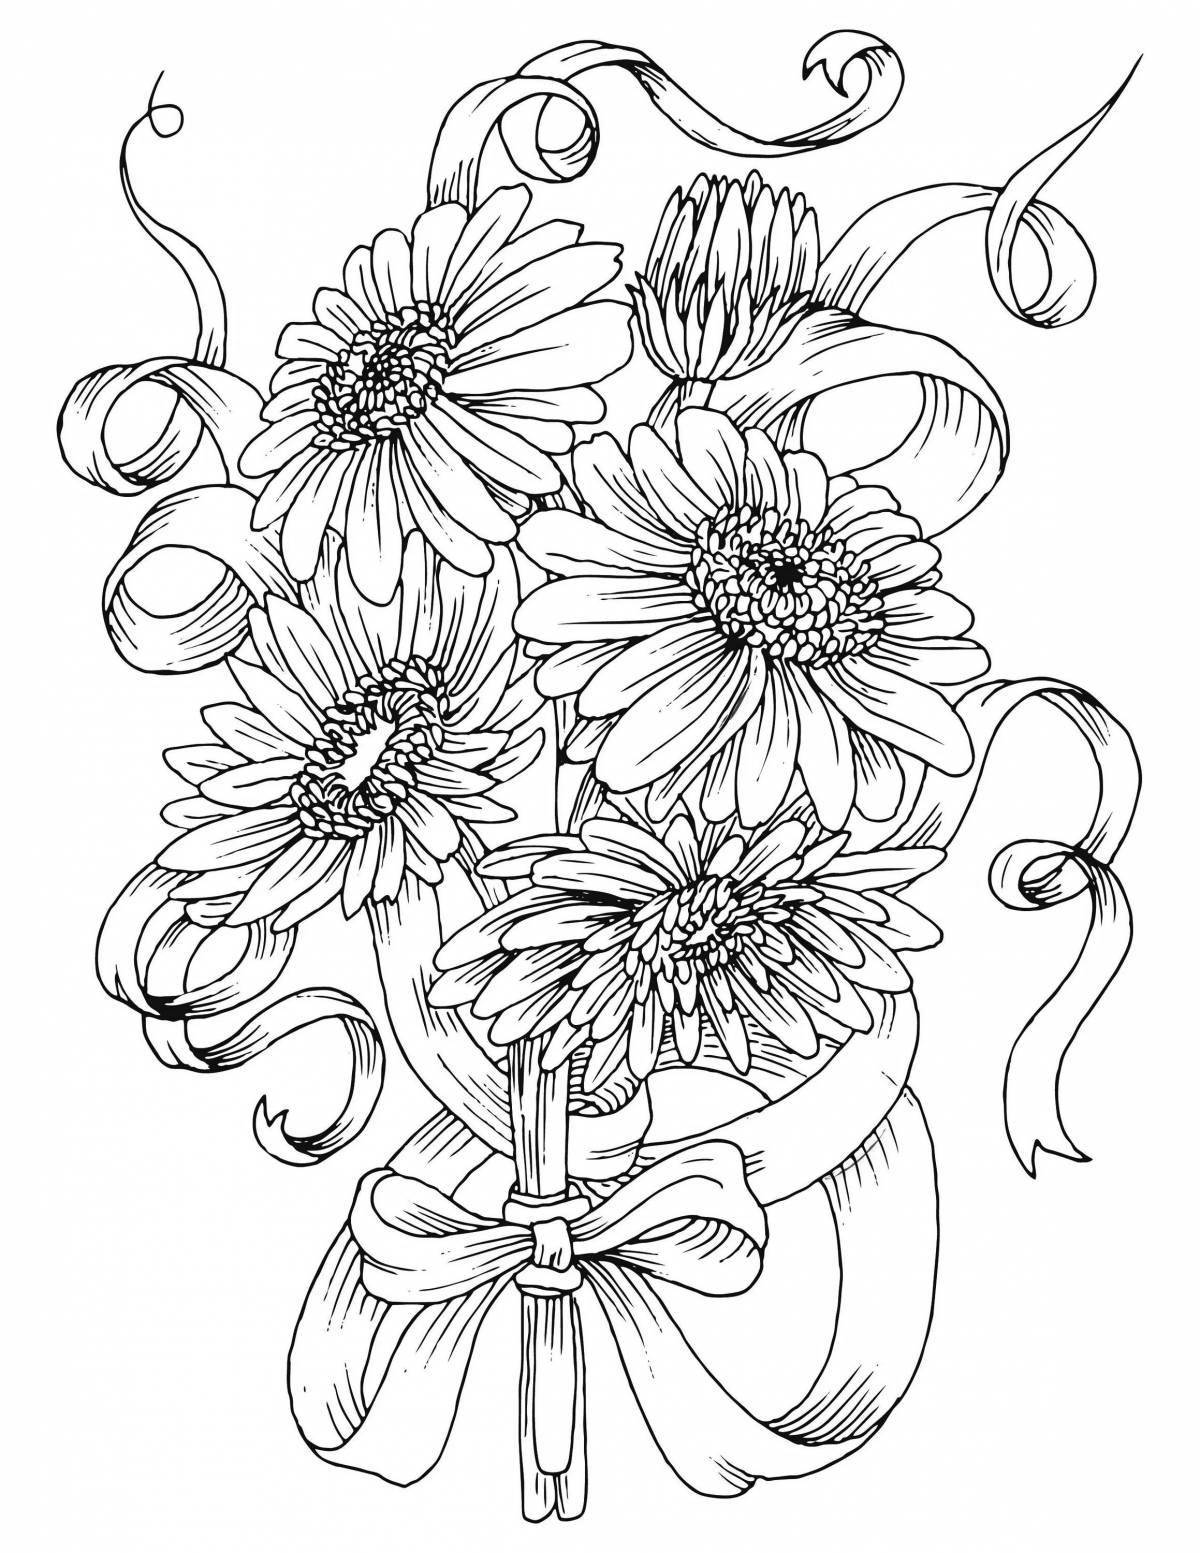 Coloring book exquisite bouquet of daisies